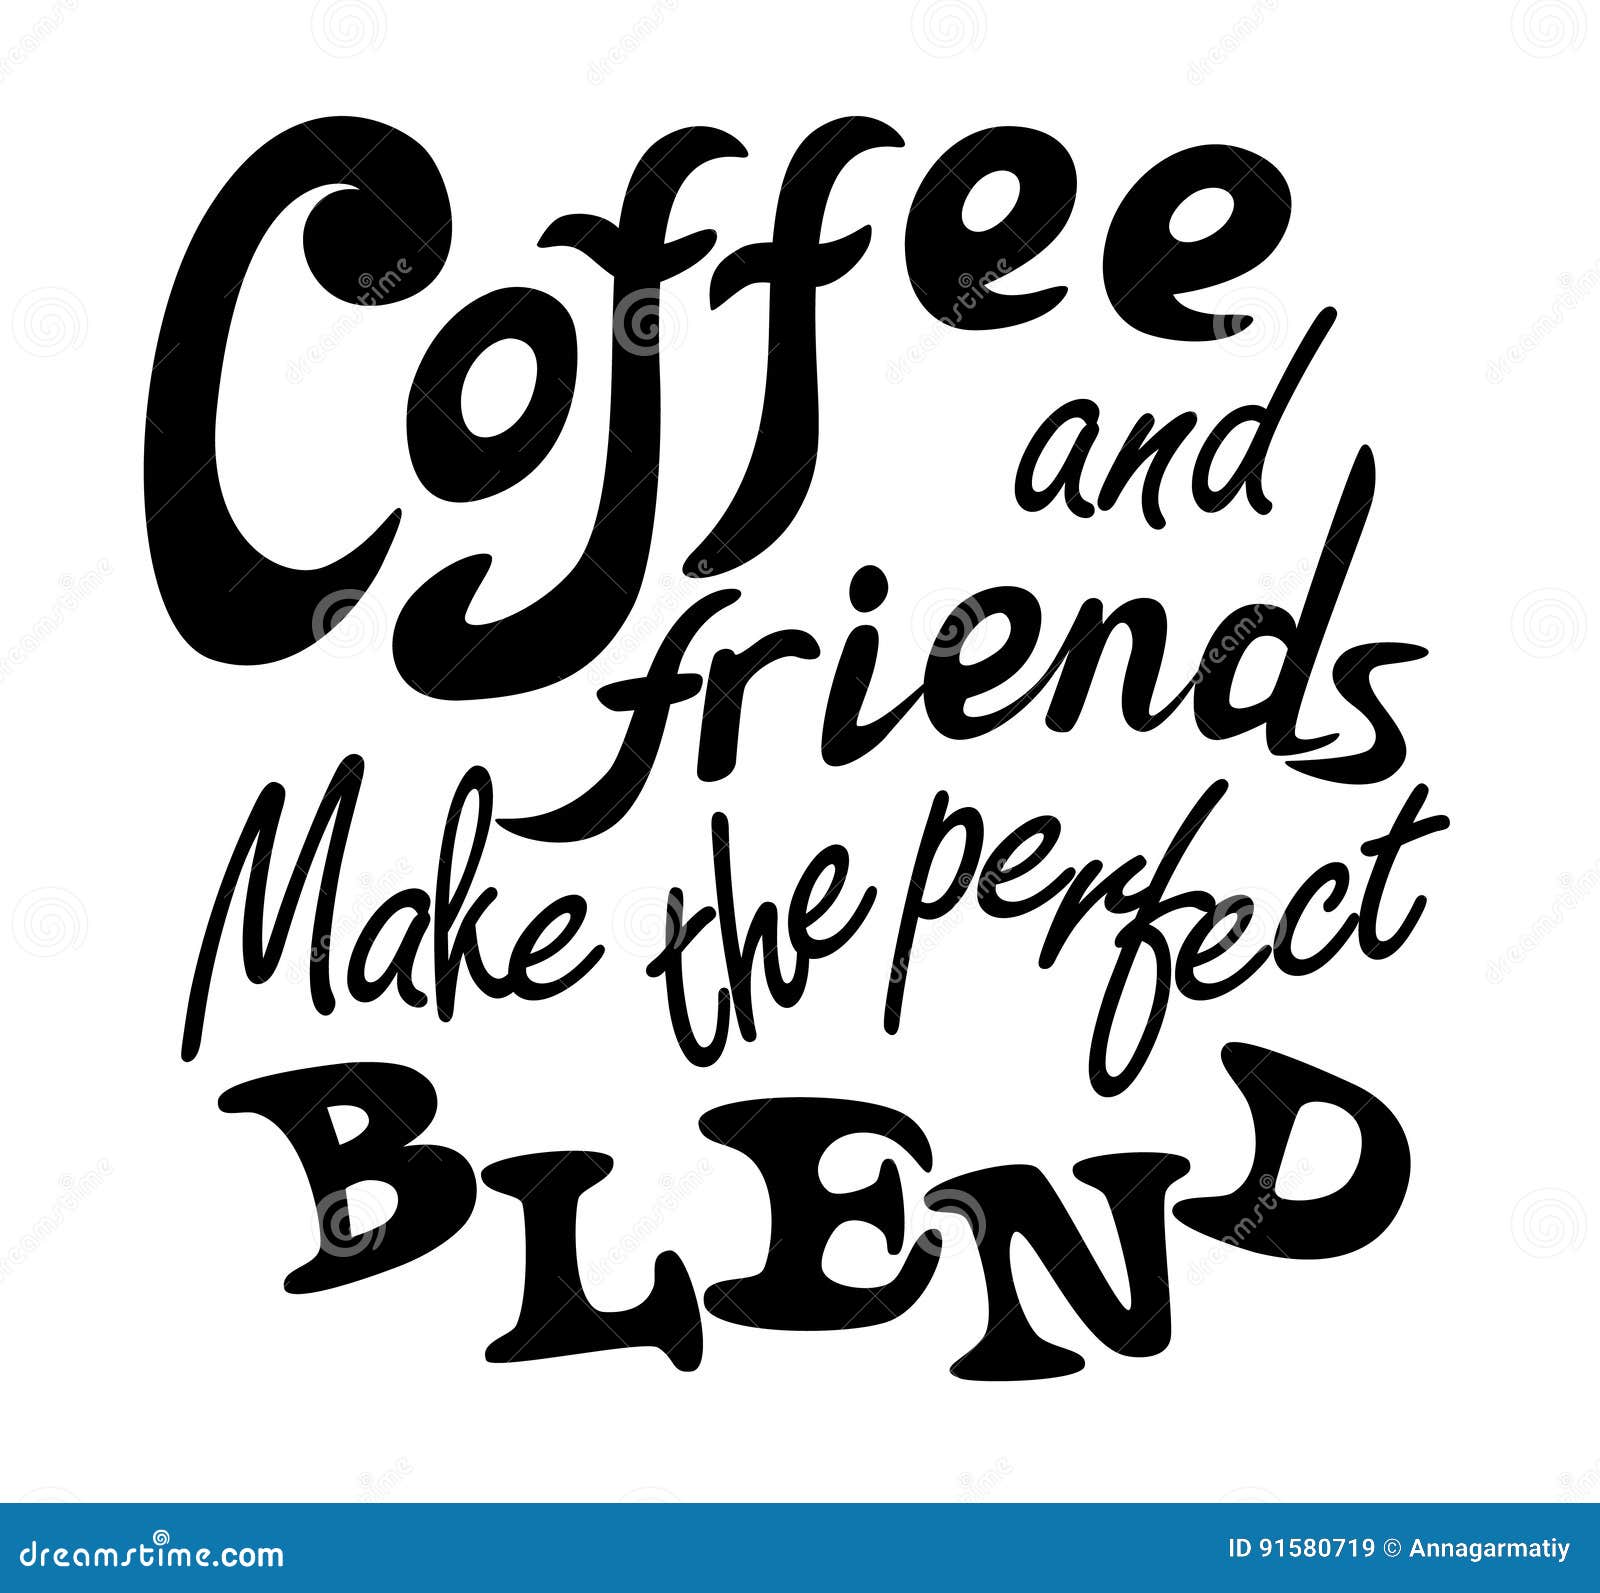 free clipart and downloads for coffee sayings